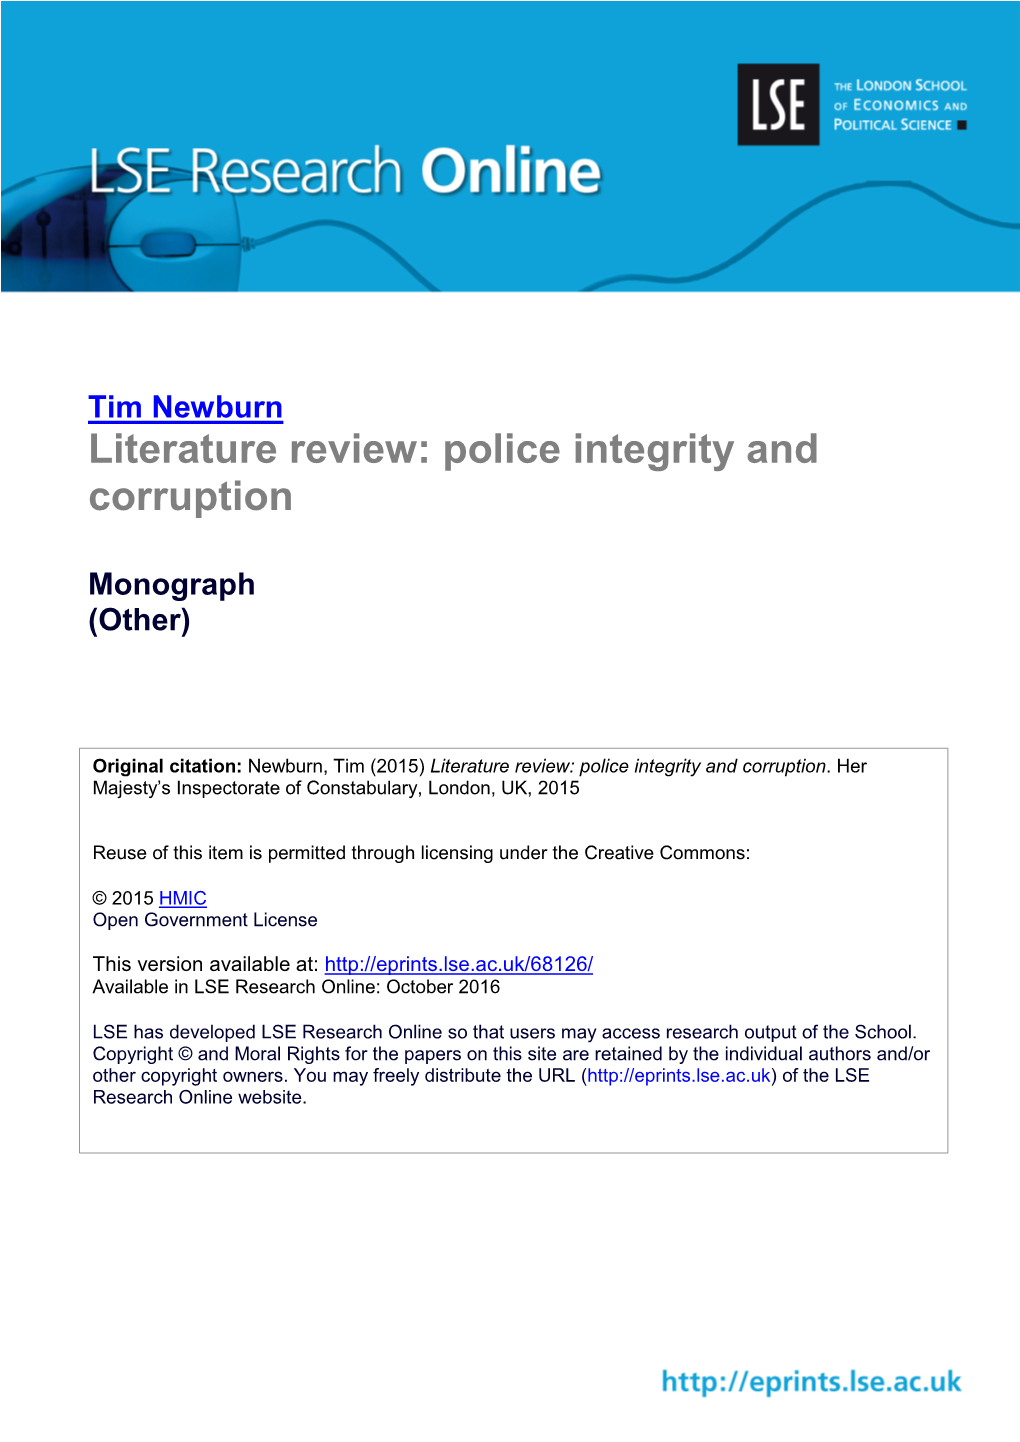 Literature Review: Police Integrity and Corruption